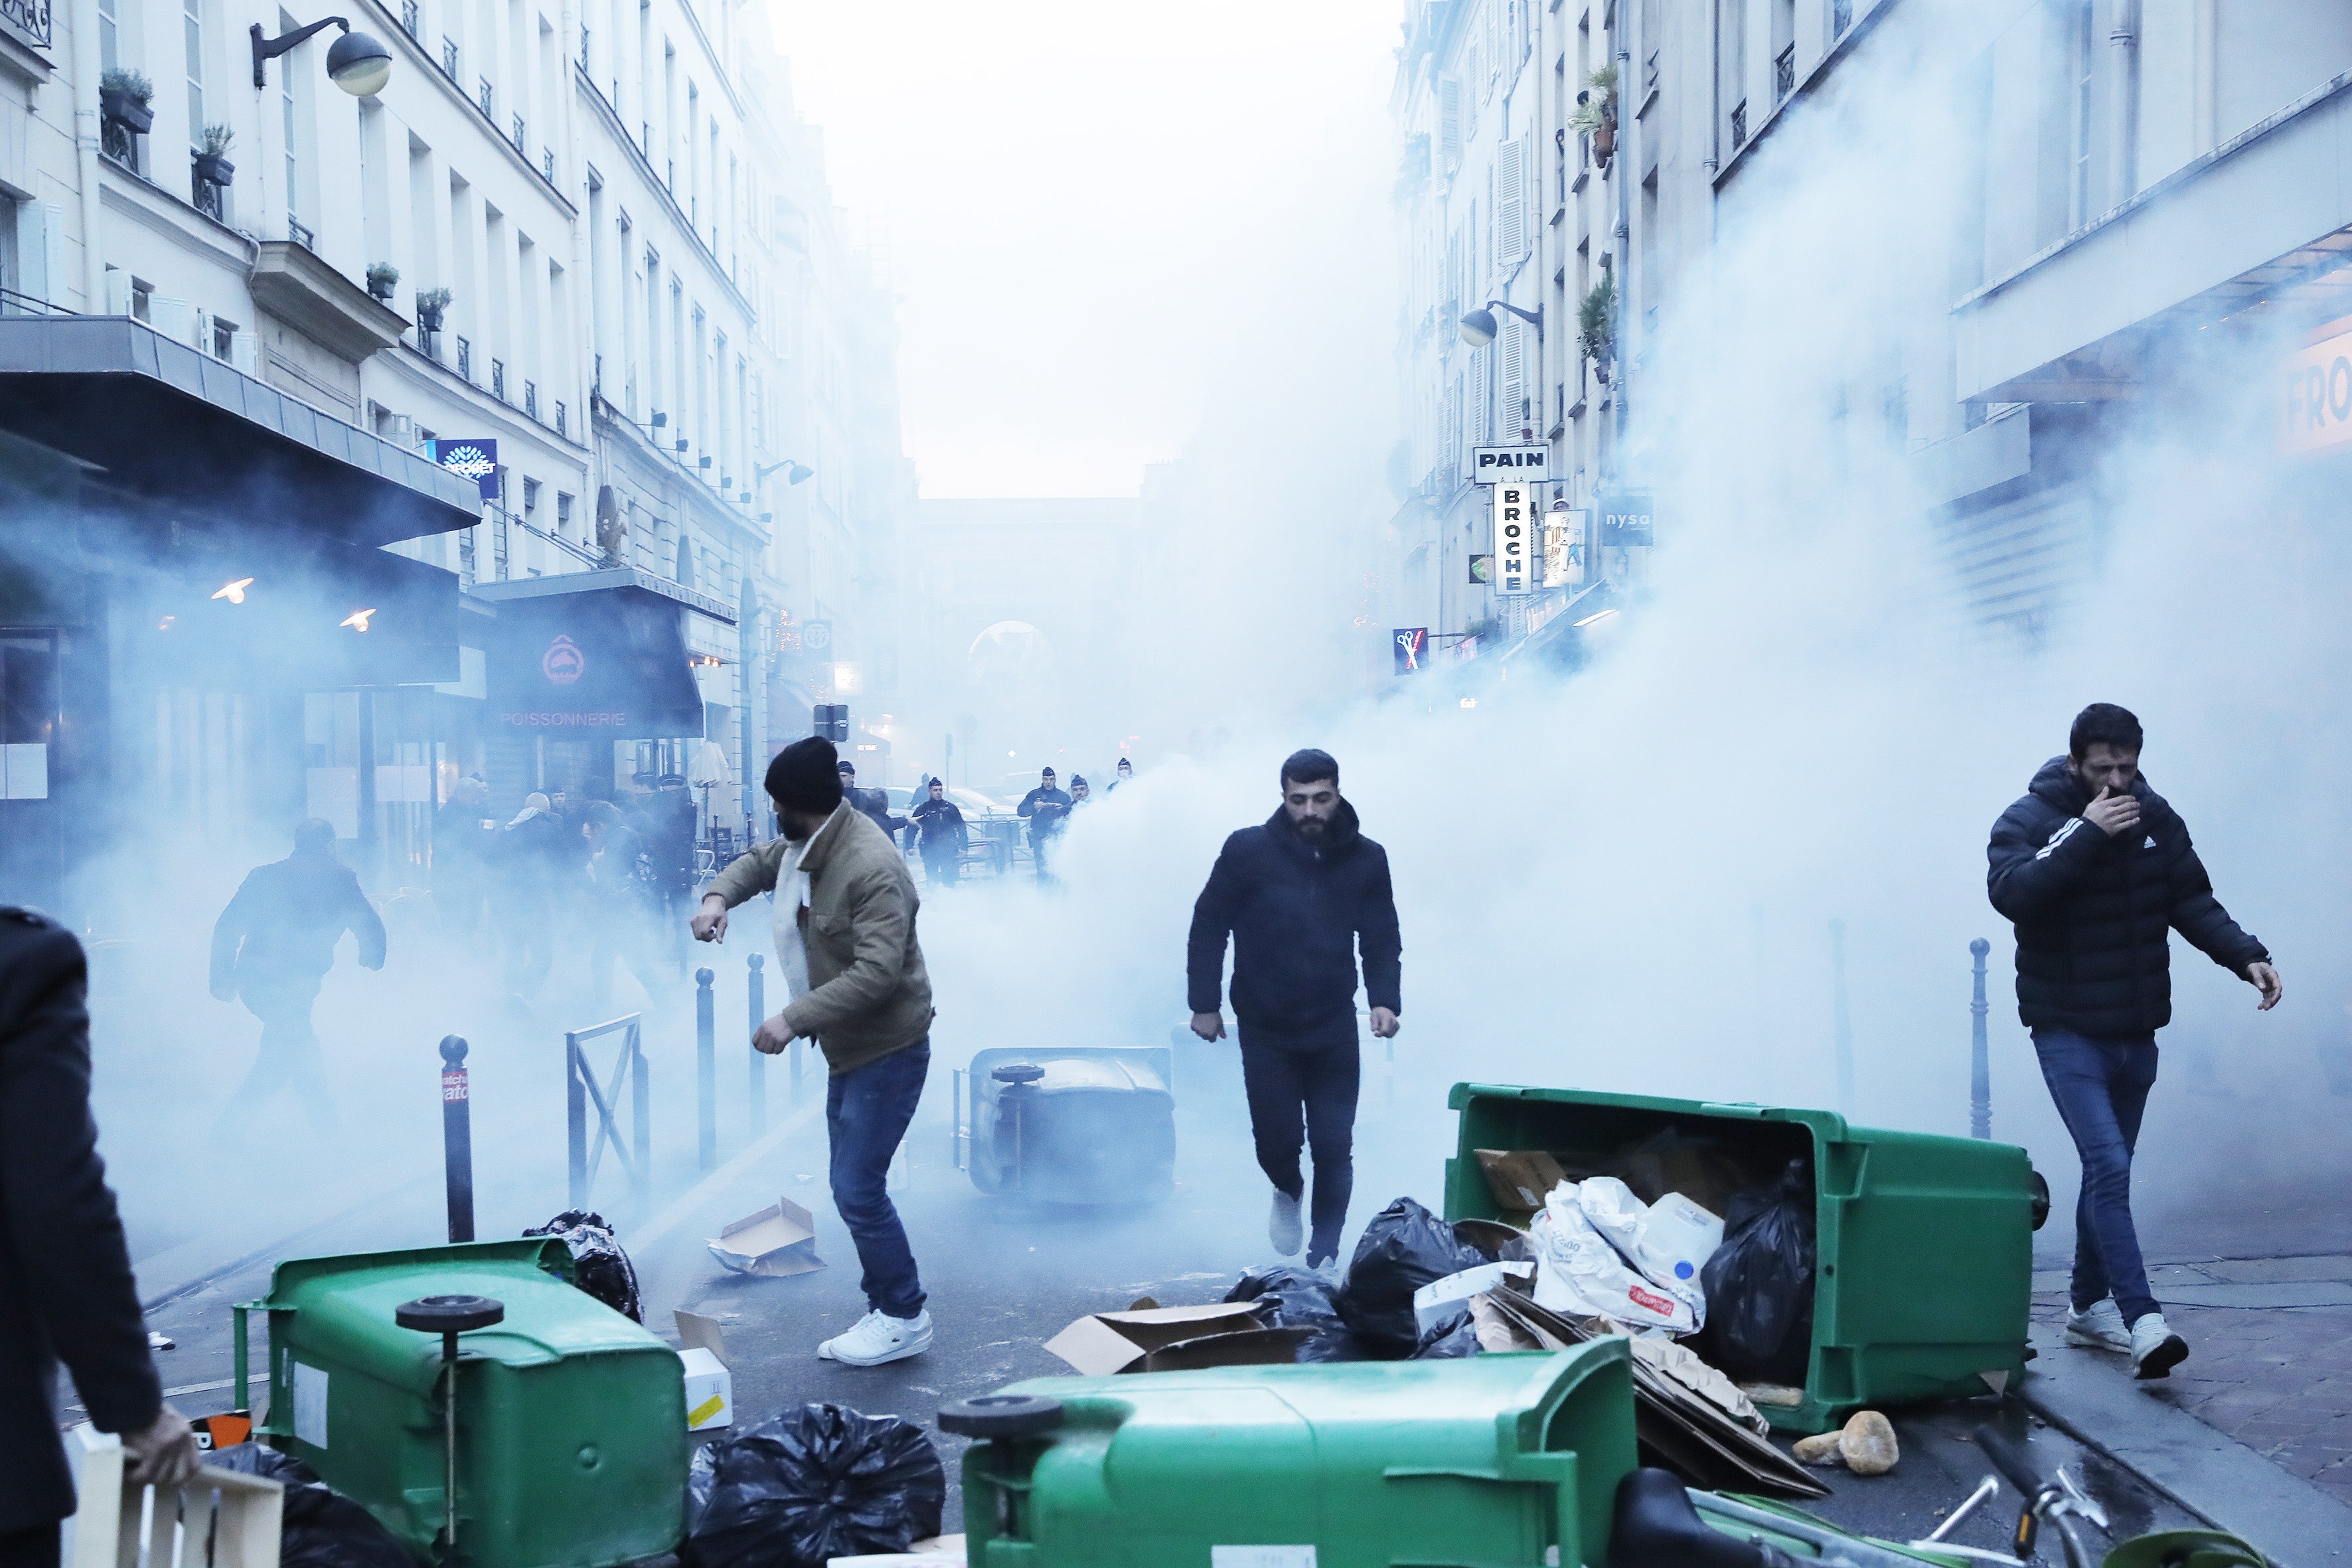 Protesters and police clash in central Paris